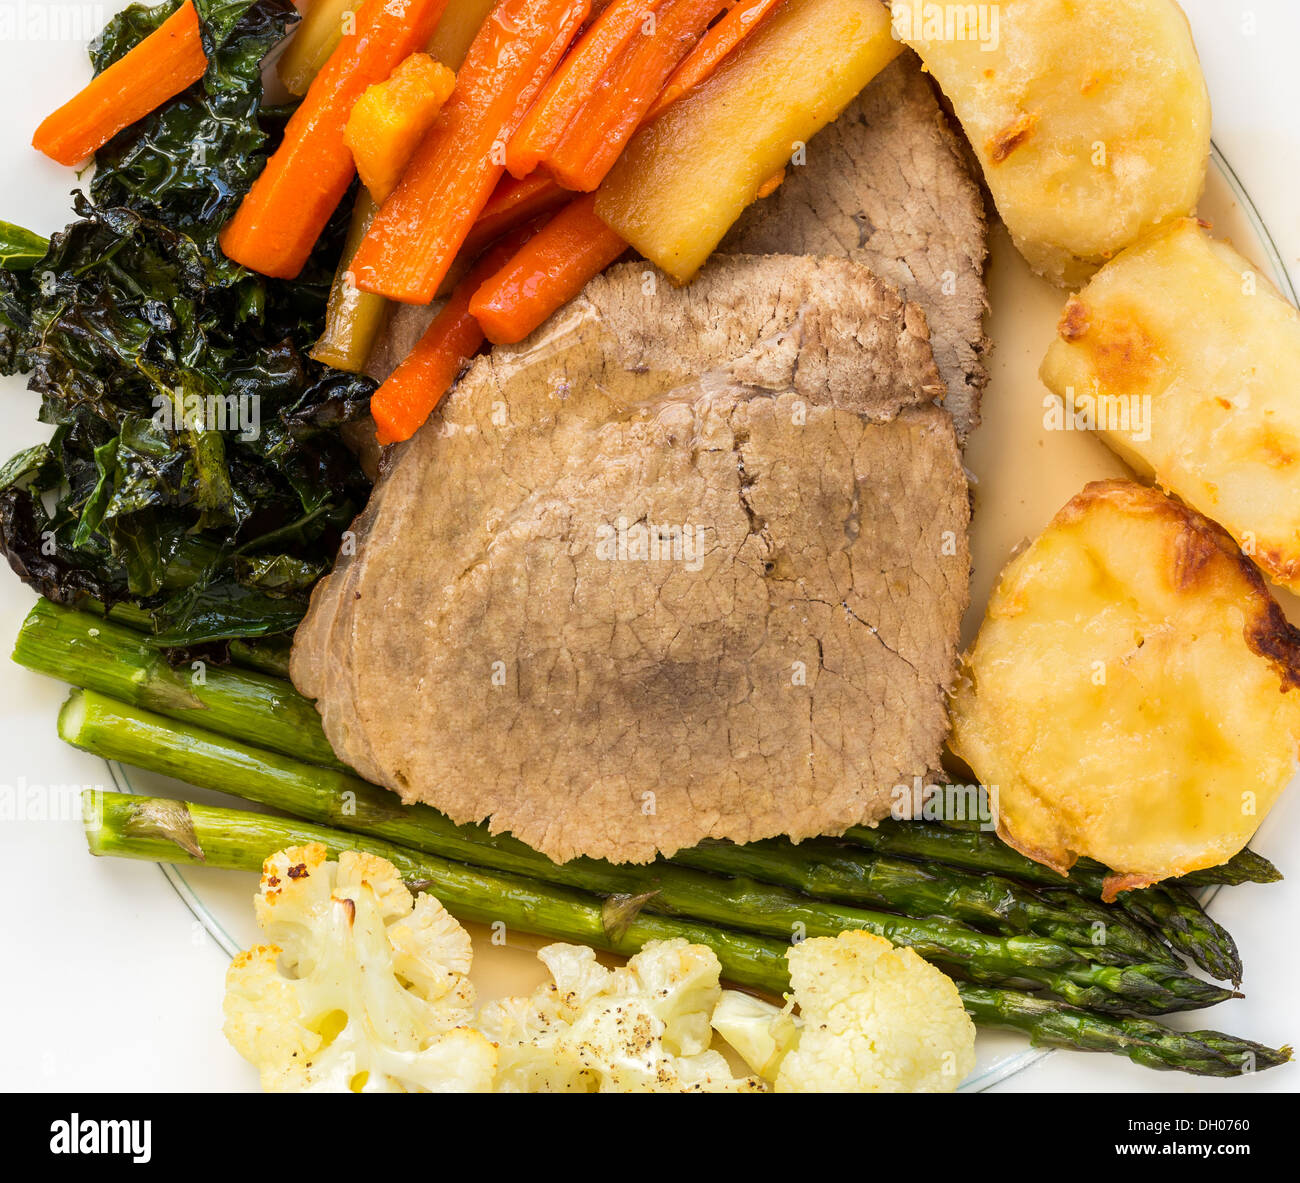 Traditional British Sunday Lunch - roast beef, potatoes, carrots, parsnips, asparagus, kale and cauliflower on a plate Stock Photo